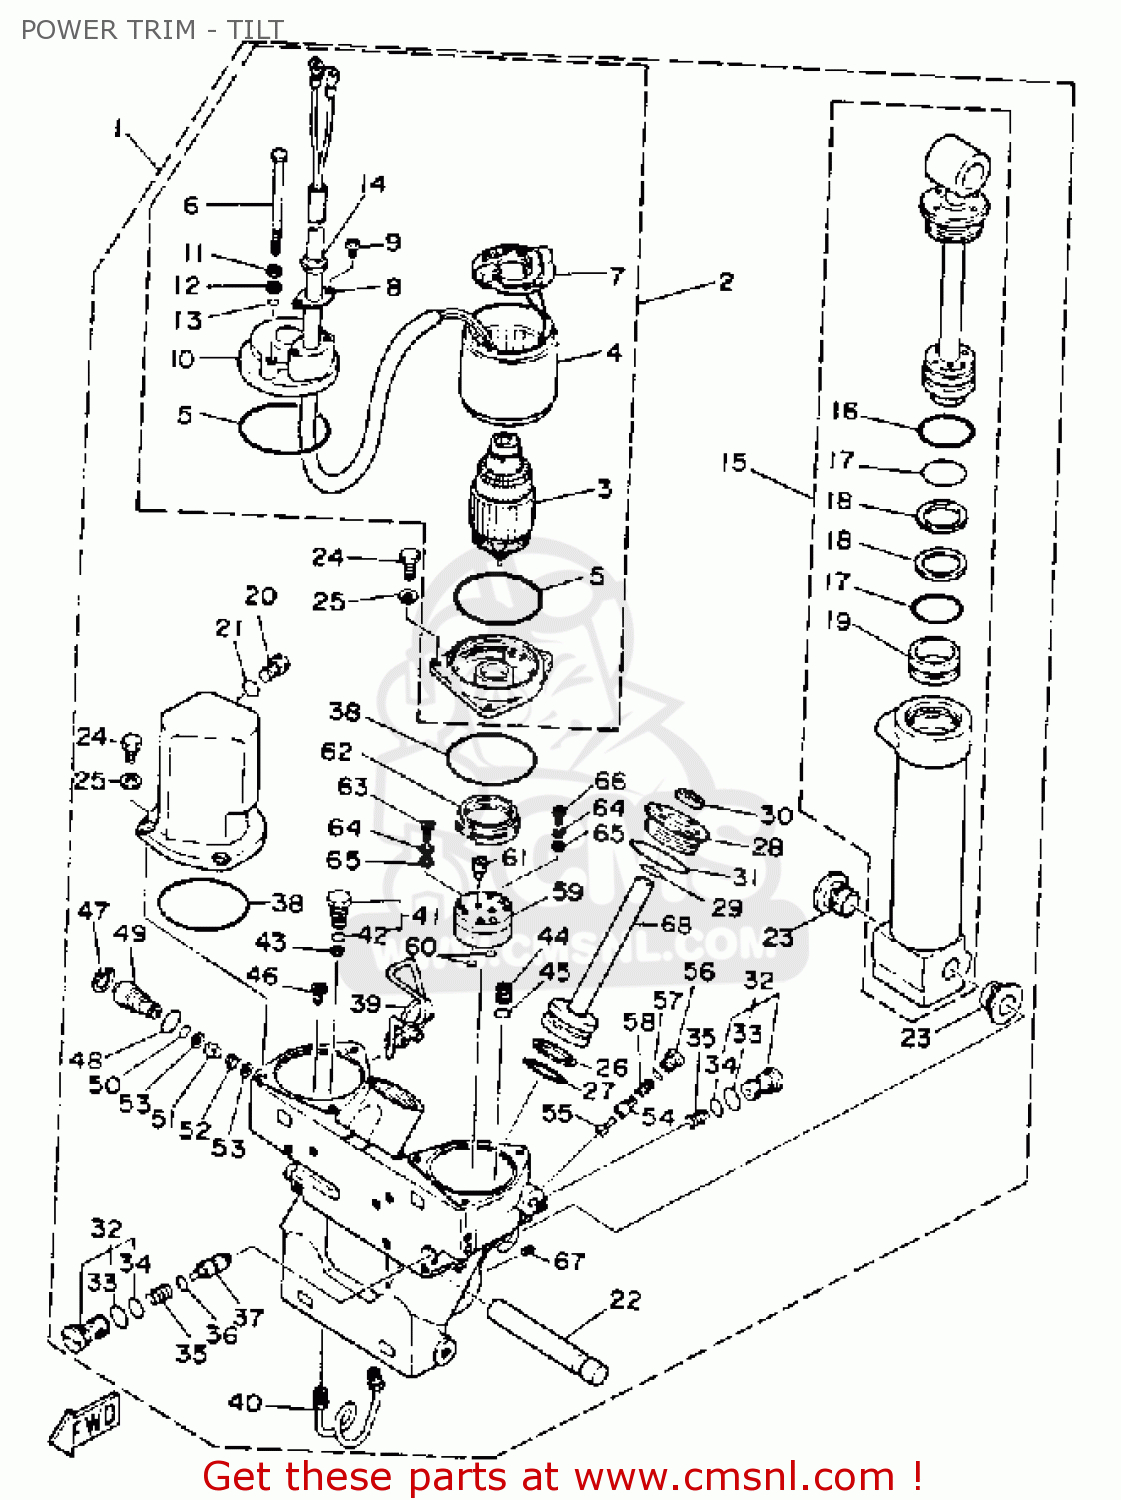 1988 Johnson 9 Hp Outboard Parts Diagram Wiring | Wiring Library - Evinrude Wiring Harness Diagram